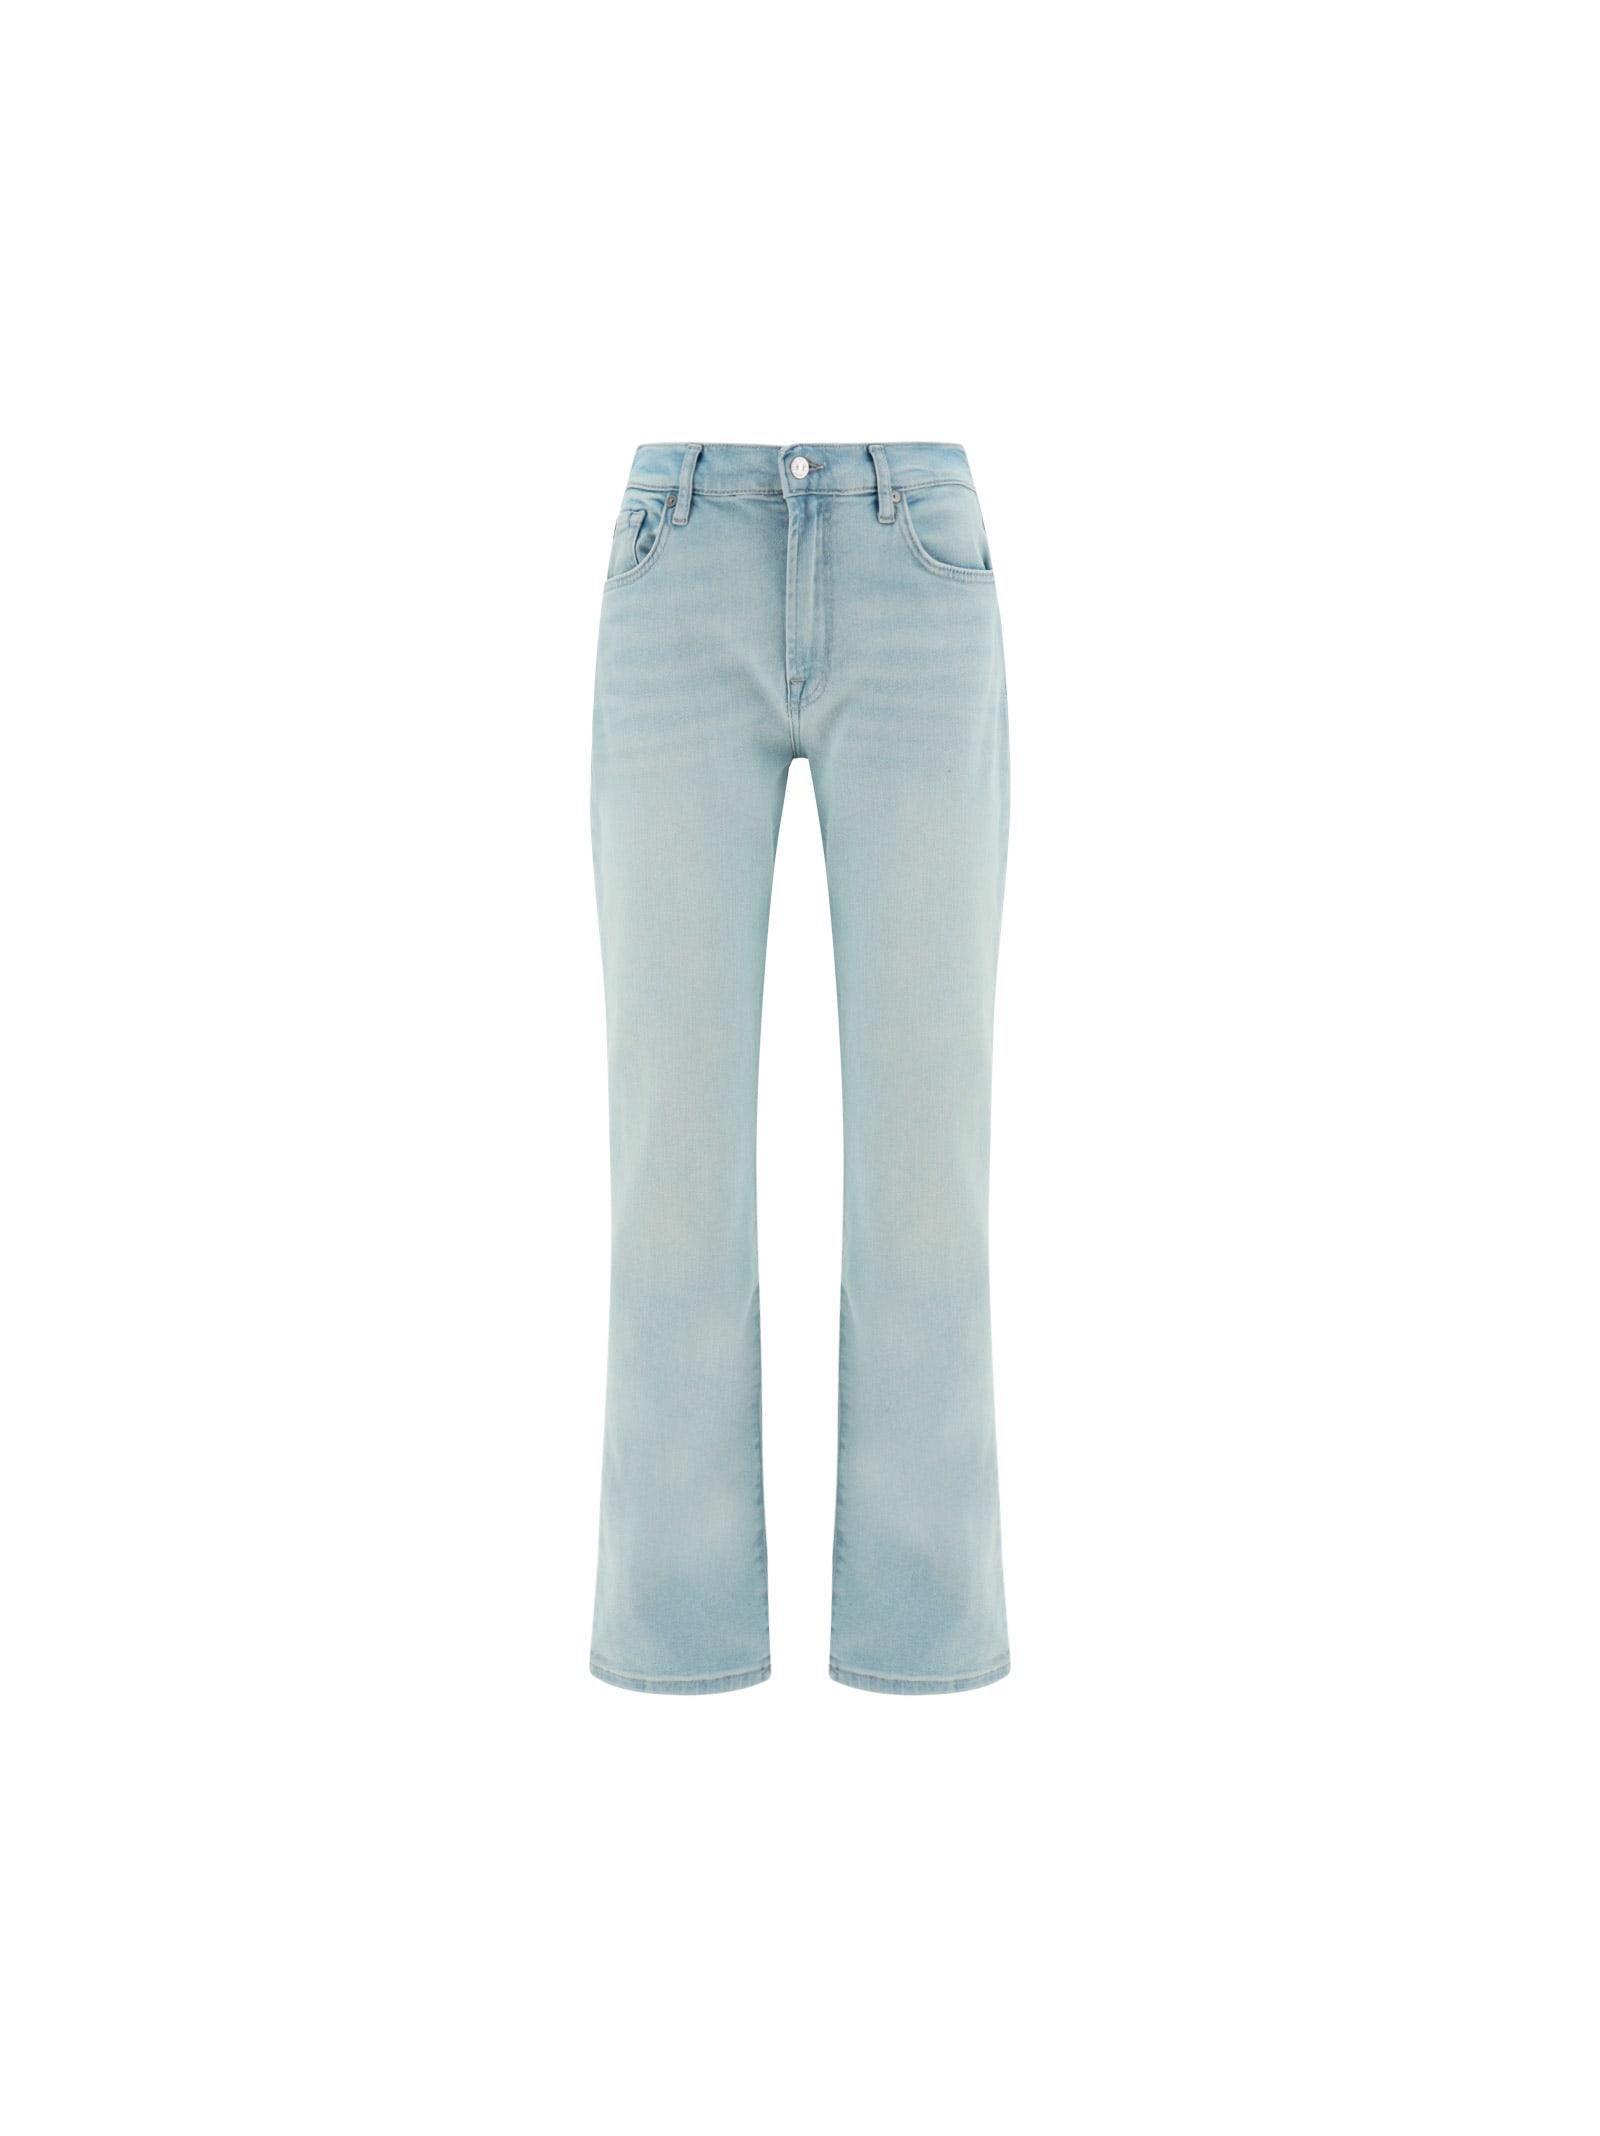 7 For All Mankind Ellie Jeans in Blue | Lyst